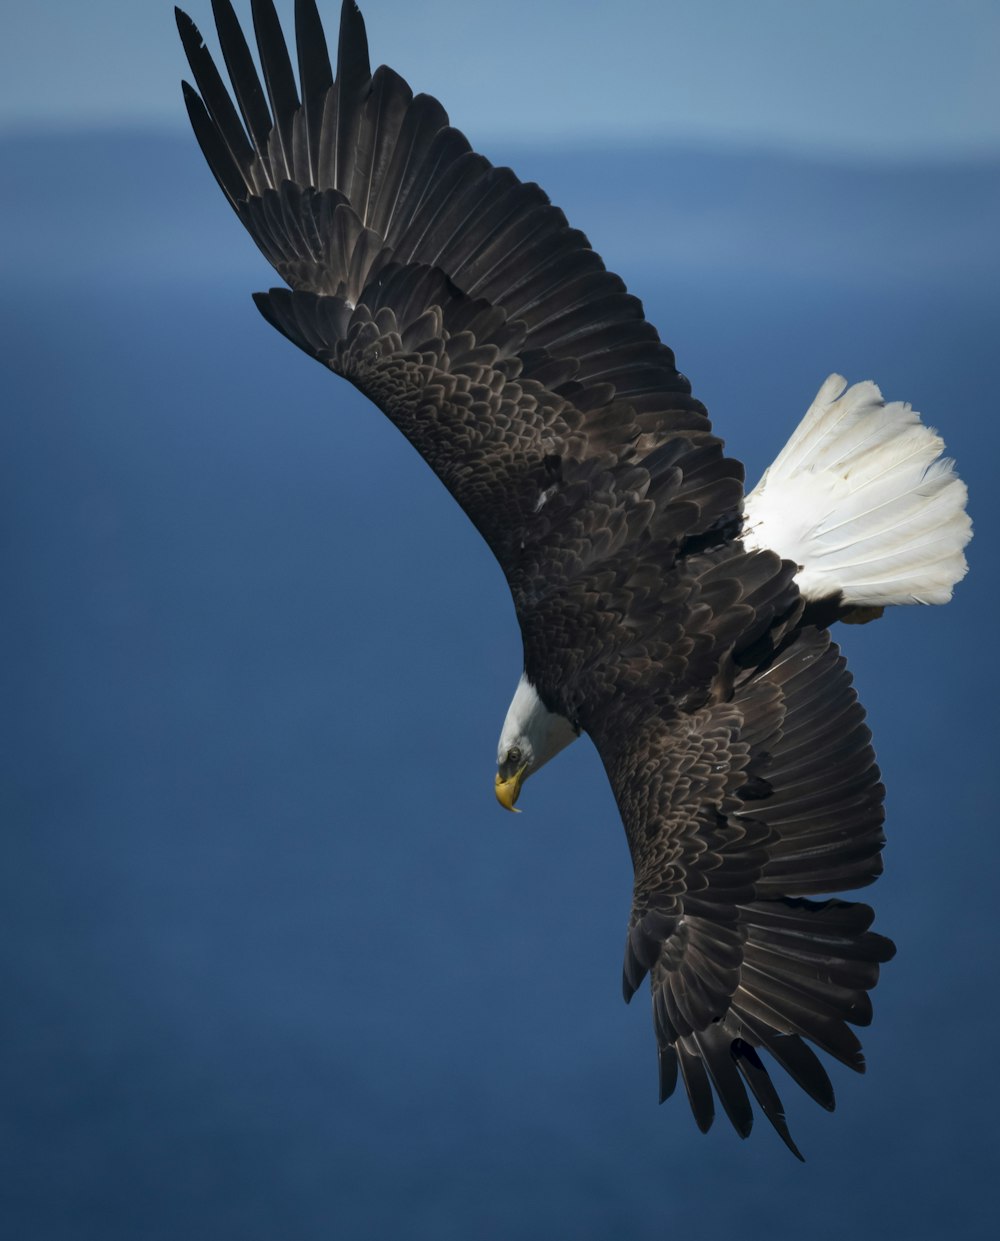 a bald eagle flying over the ocean on a sunny day